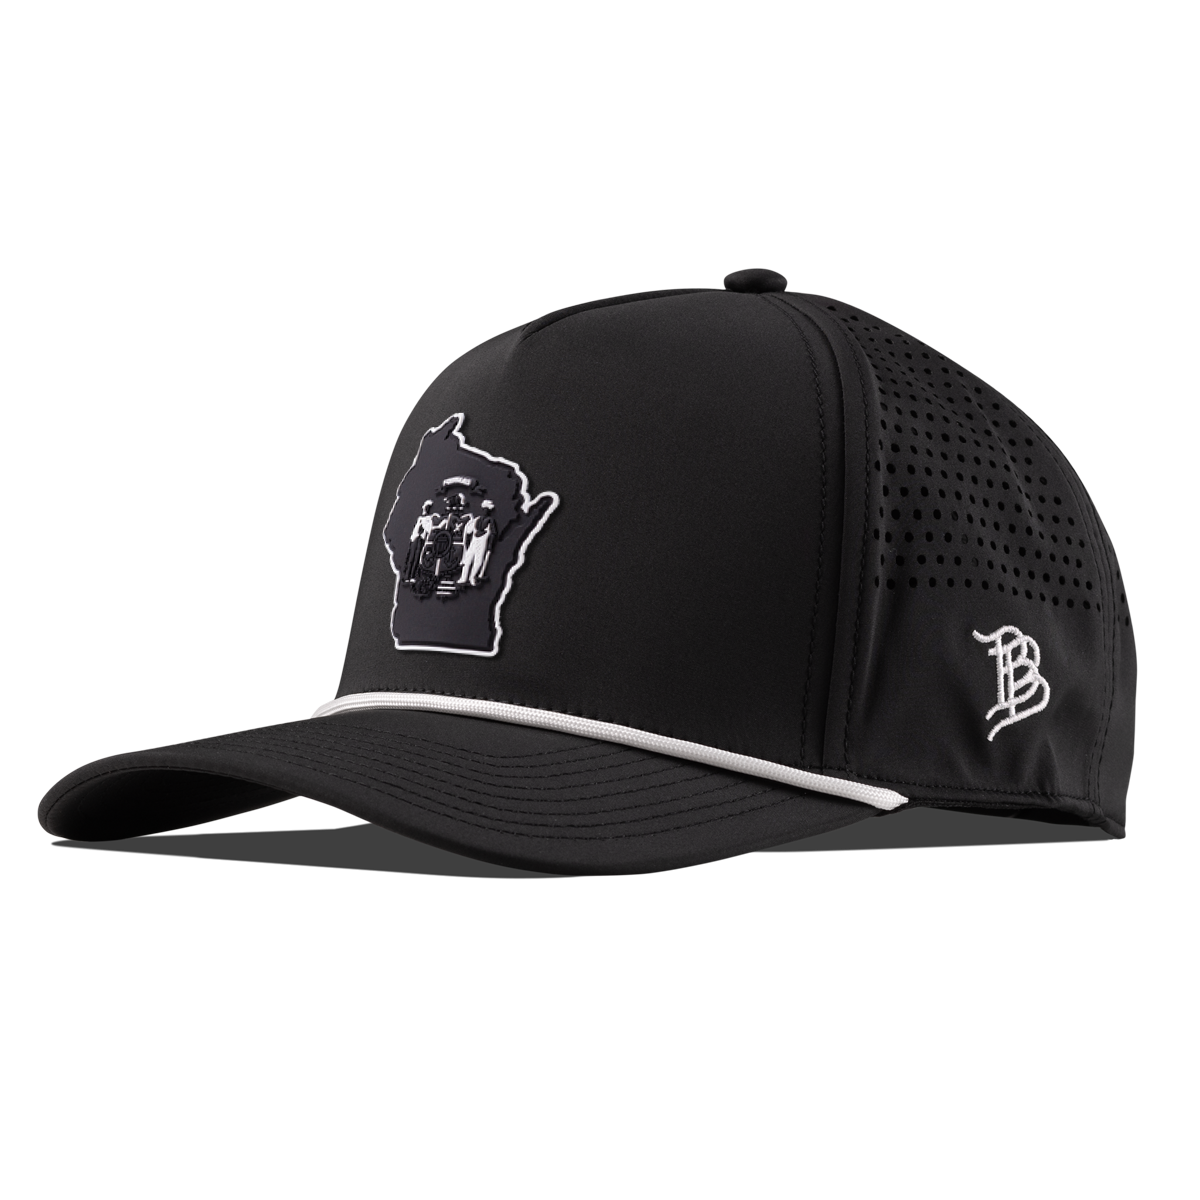 Wisconsin Vintage Curved 5 Panel Performance Black/White